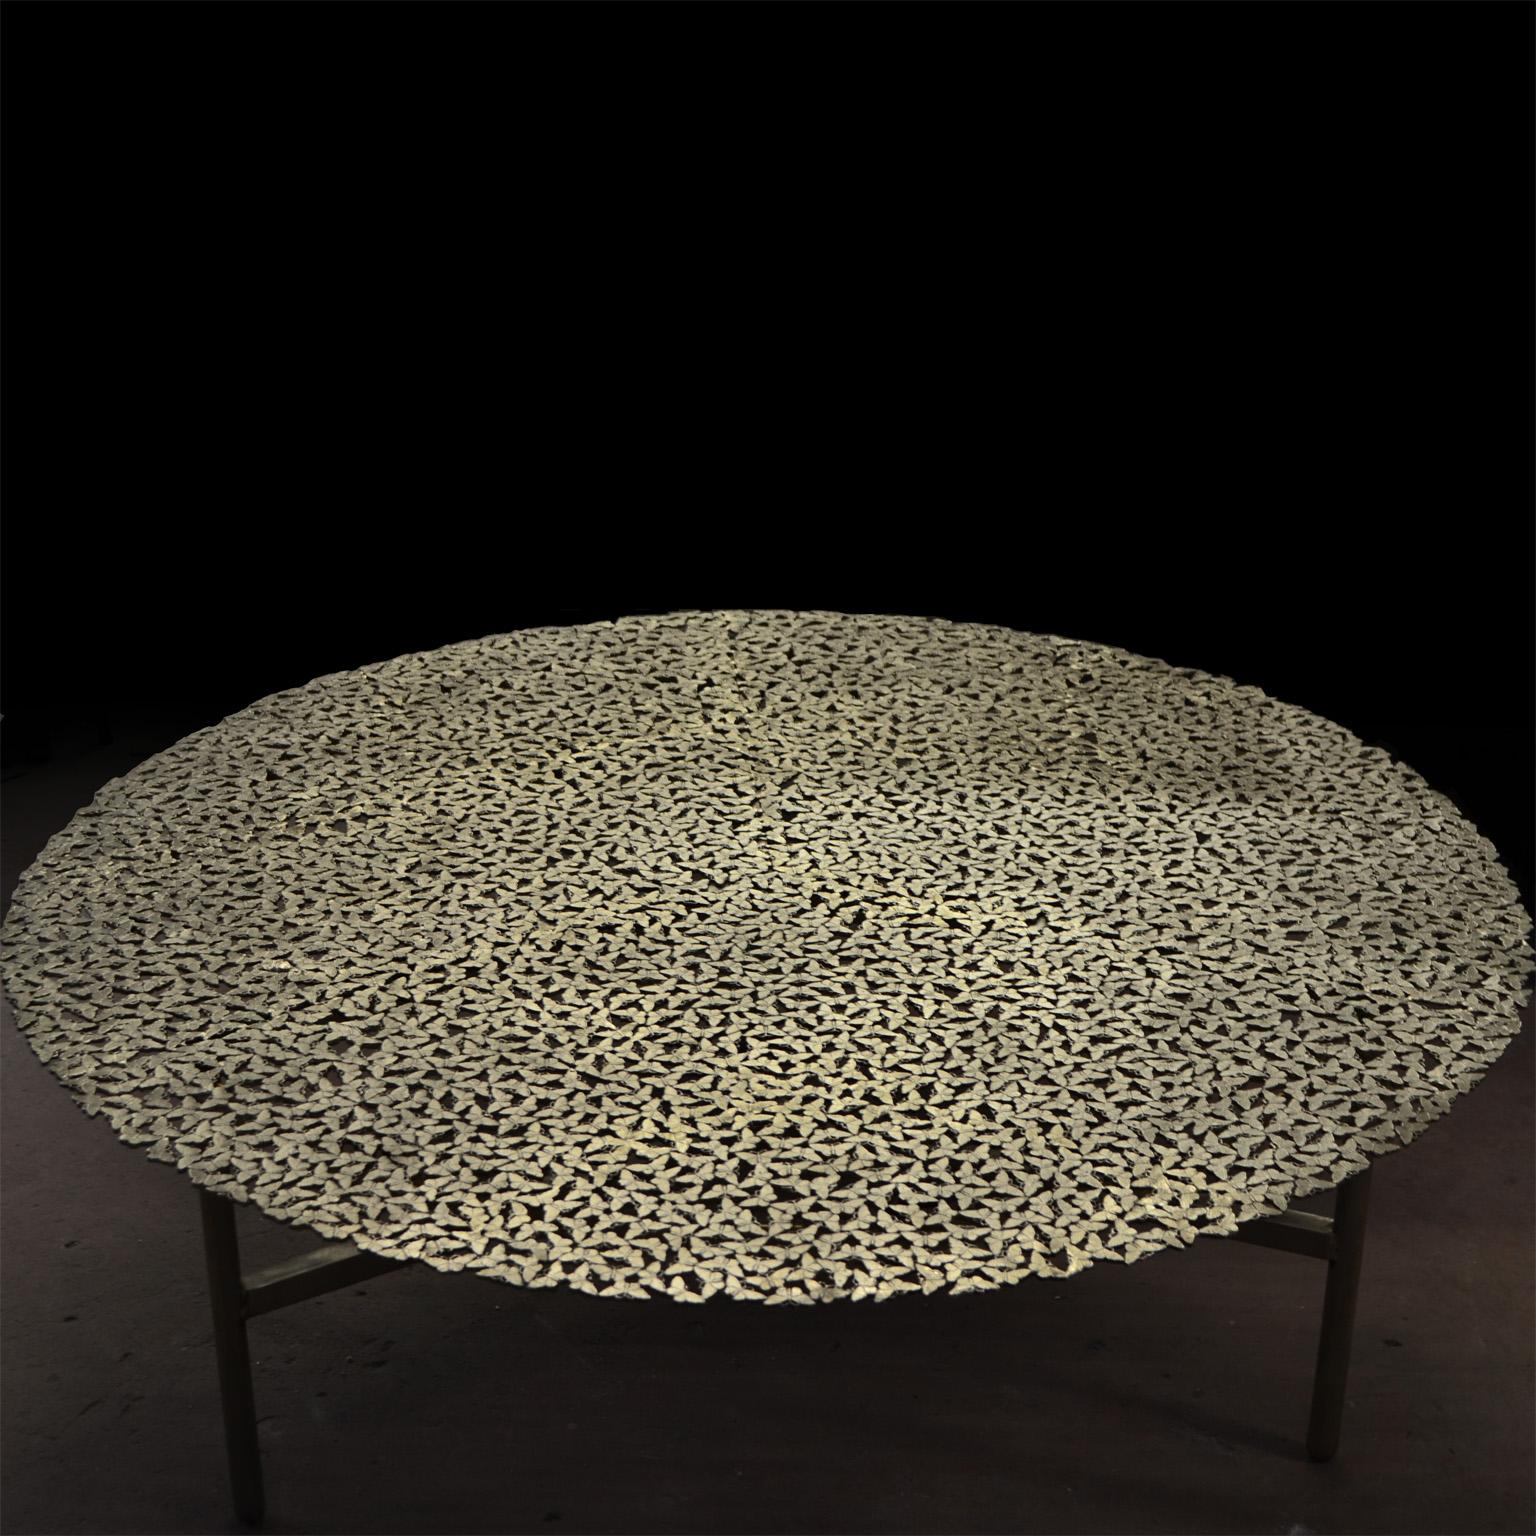 Jean Bronze Round Coffee Table by Fred and Juul
Dimensions: Ø 120 x H 40 cm.
Materials: Bronze.

Also available in a black-patinated or white finish. Custom sizes, materials or finishes are available on request. Please contact us.

A swarm of